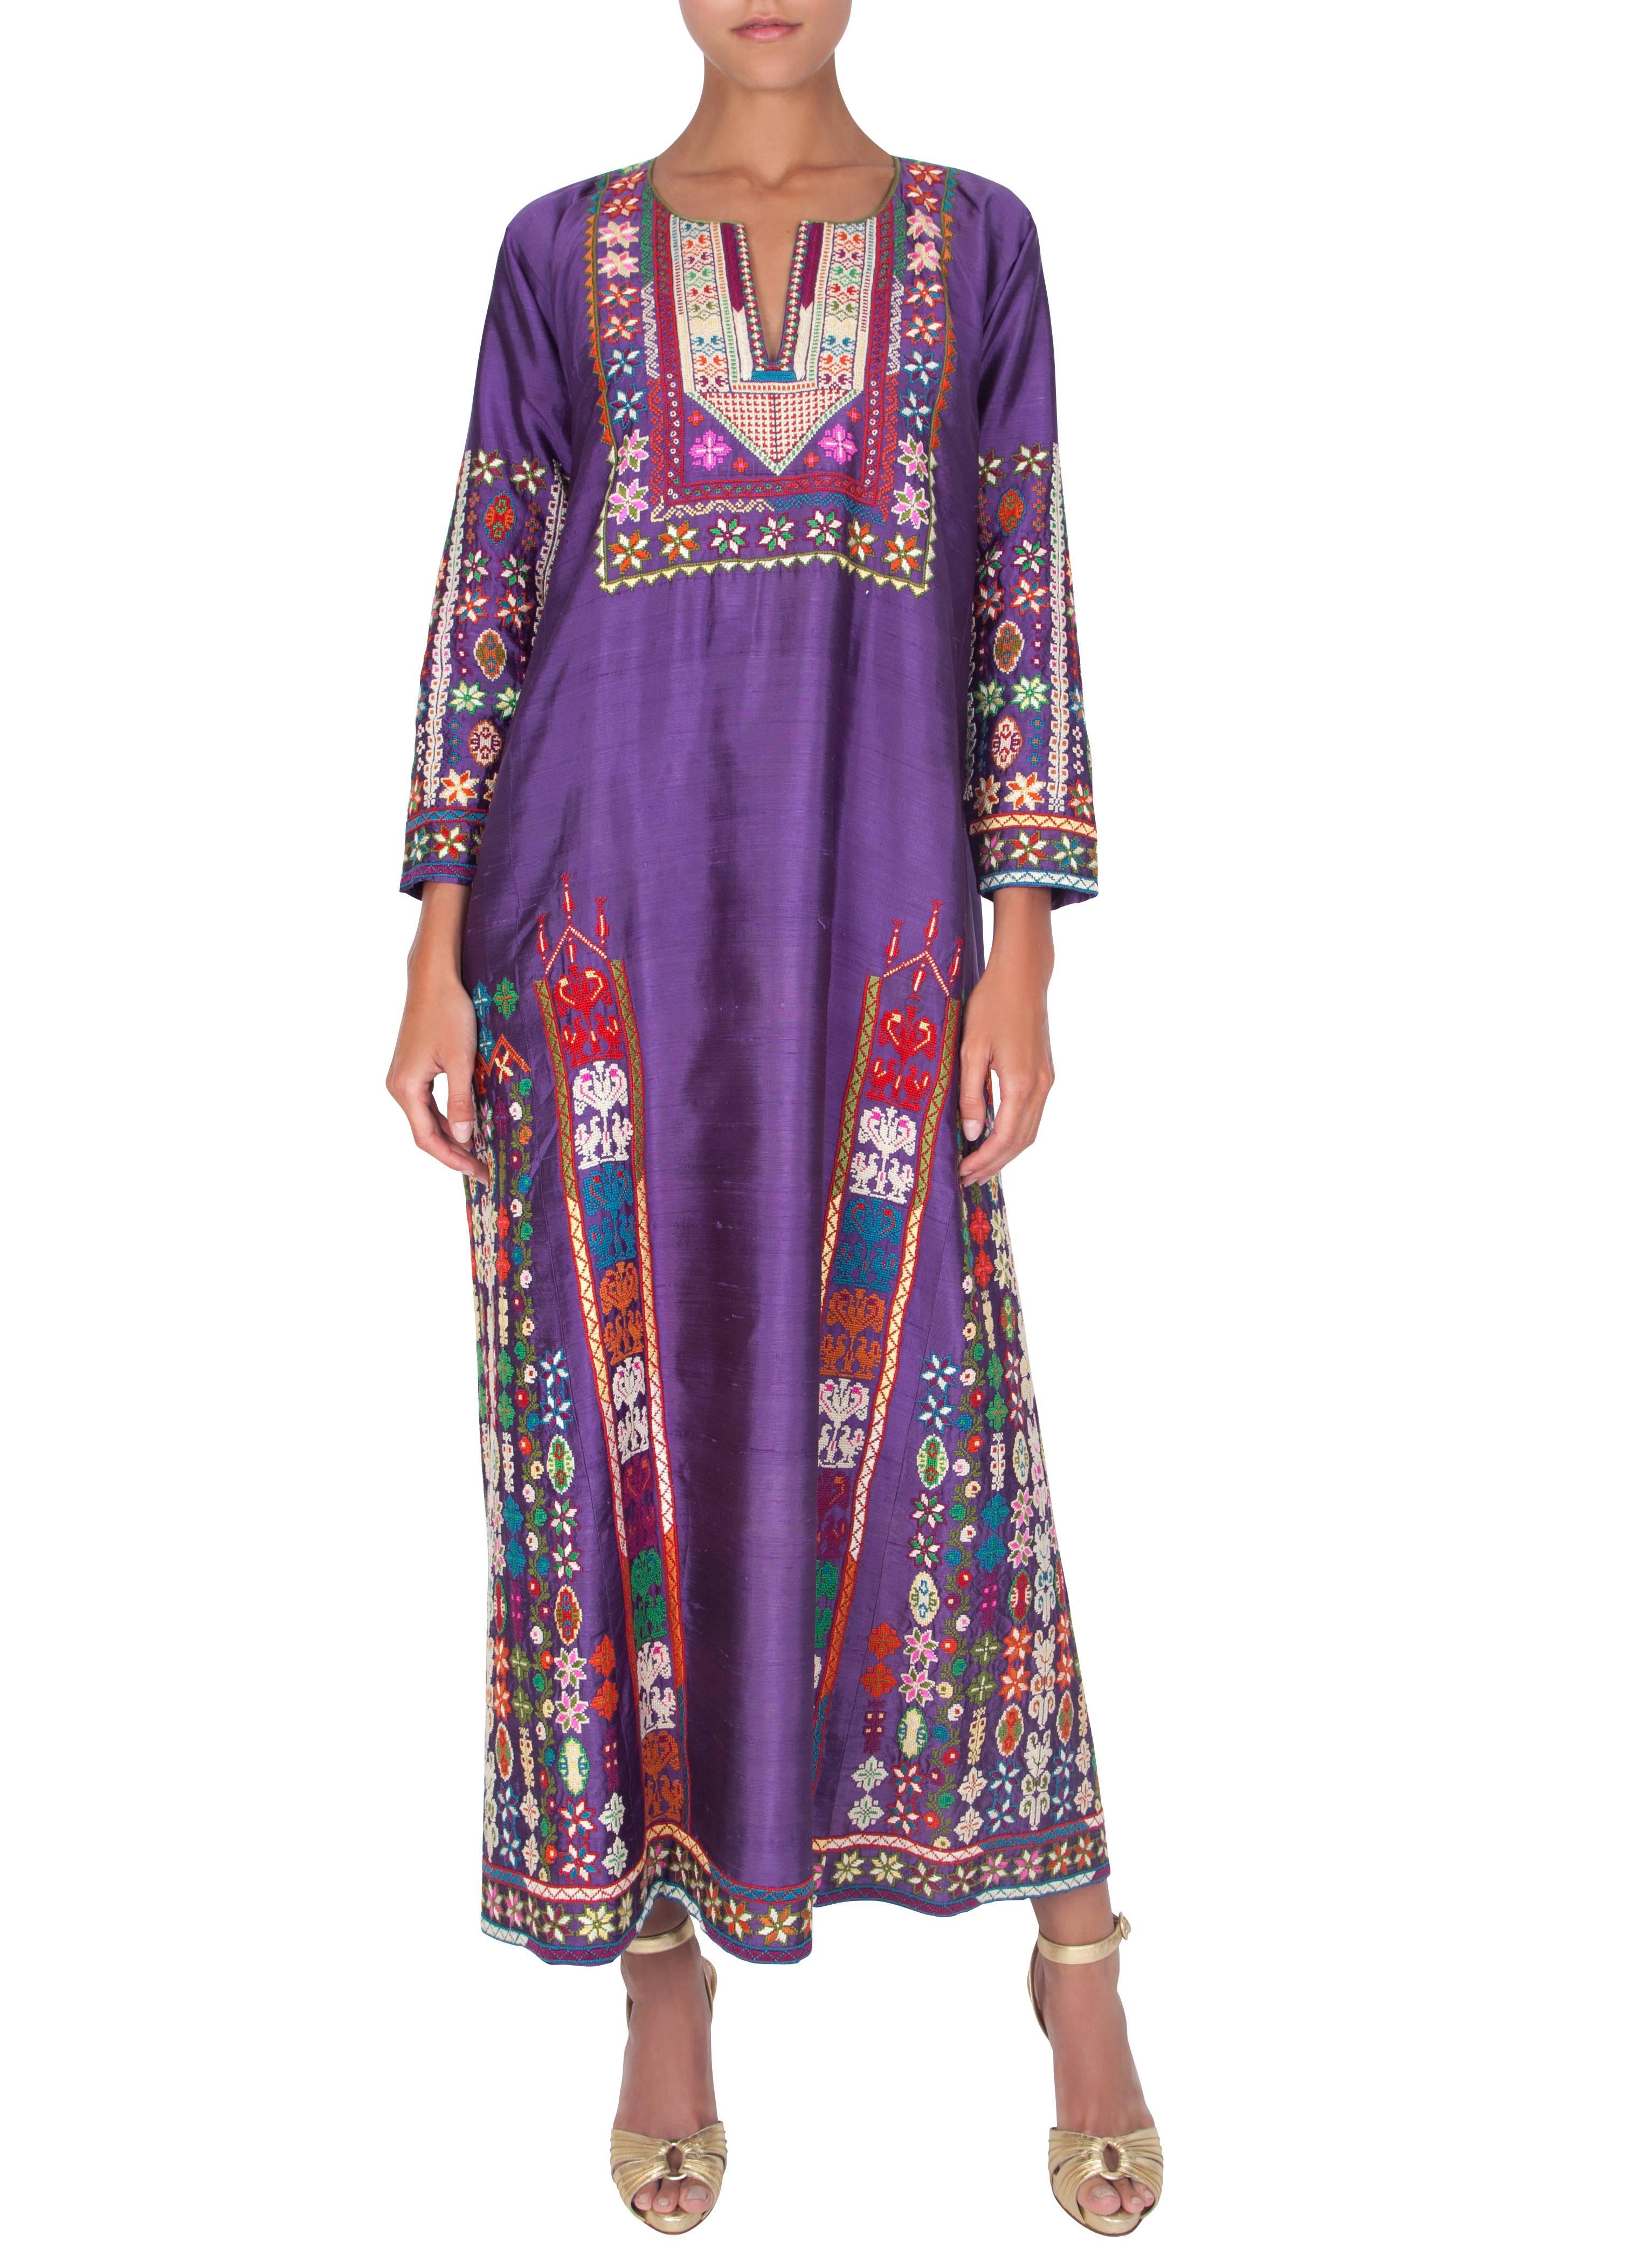 A vibrant amethyst silk caftan with multicoloured embroidery hand-embroidered in Palestine using traditional craft methods from the 1960s/70s. The label specifies ‘Embroidered by Palestinian Women according to Traditional designs.’ The full length